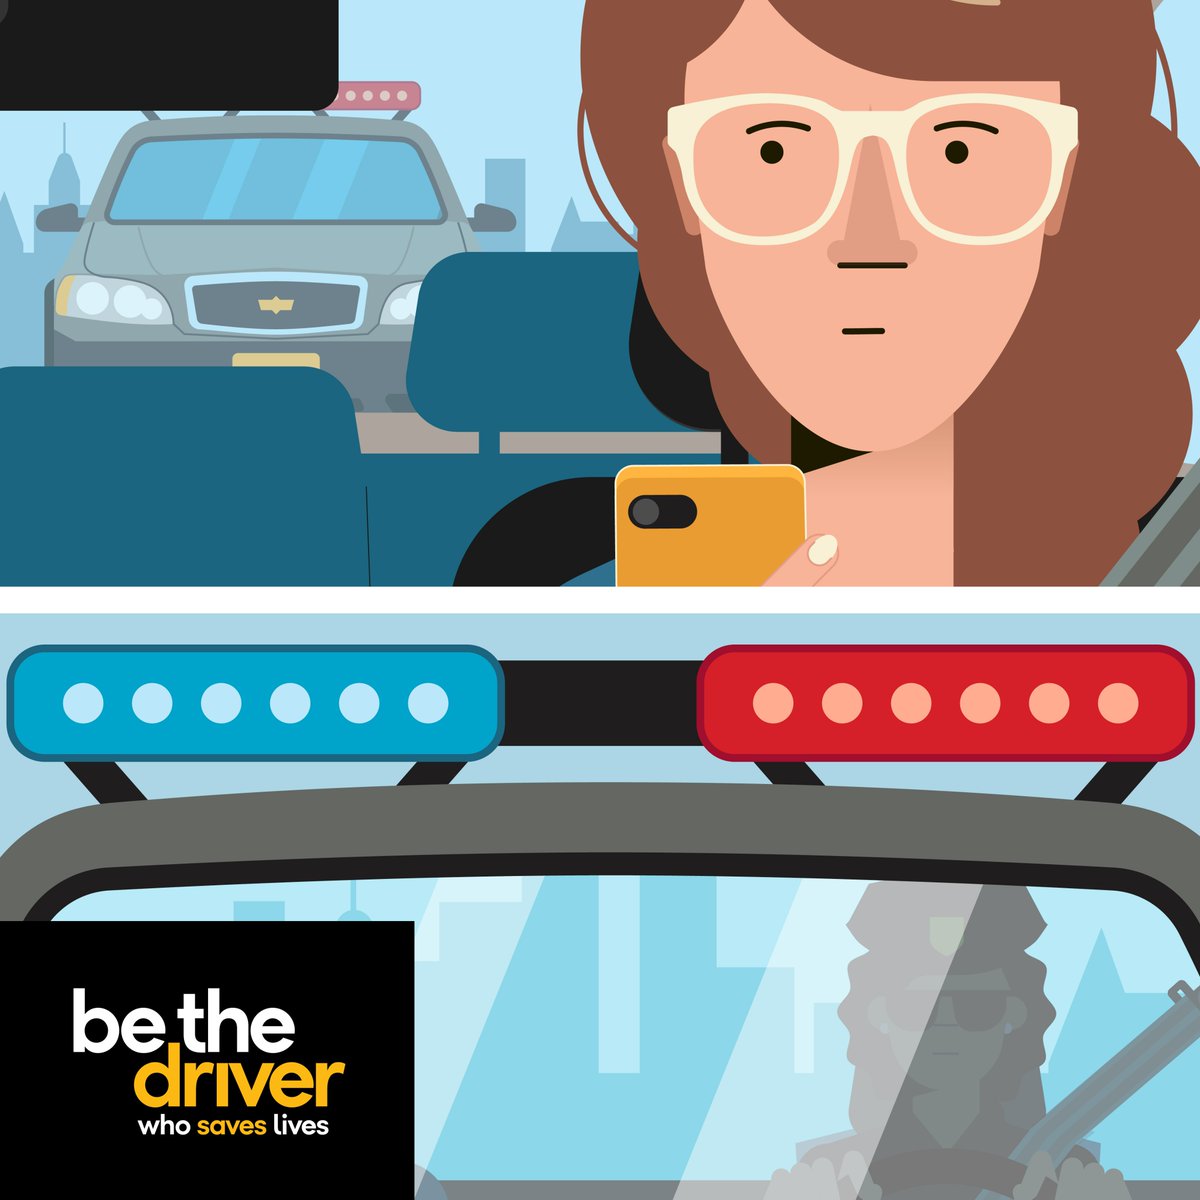 Avoid the ticket and keep everyone safe on the road. That sounds like a great decision! 
NO #DistractedDriving #BeTheDriver #VisionZero #weekend #MDTraffic #montgomerycountymd